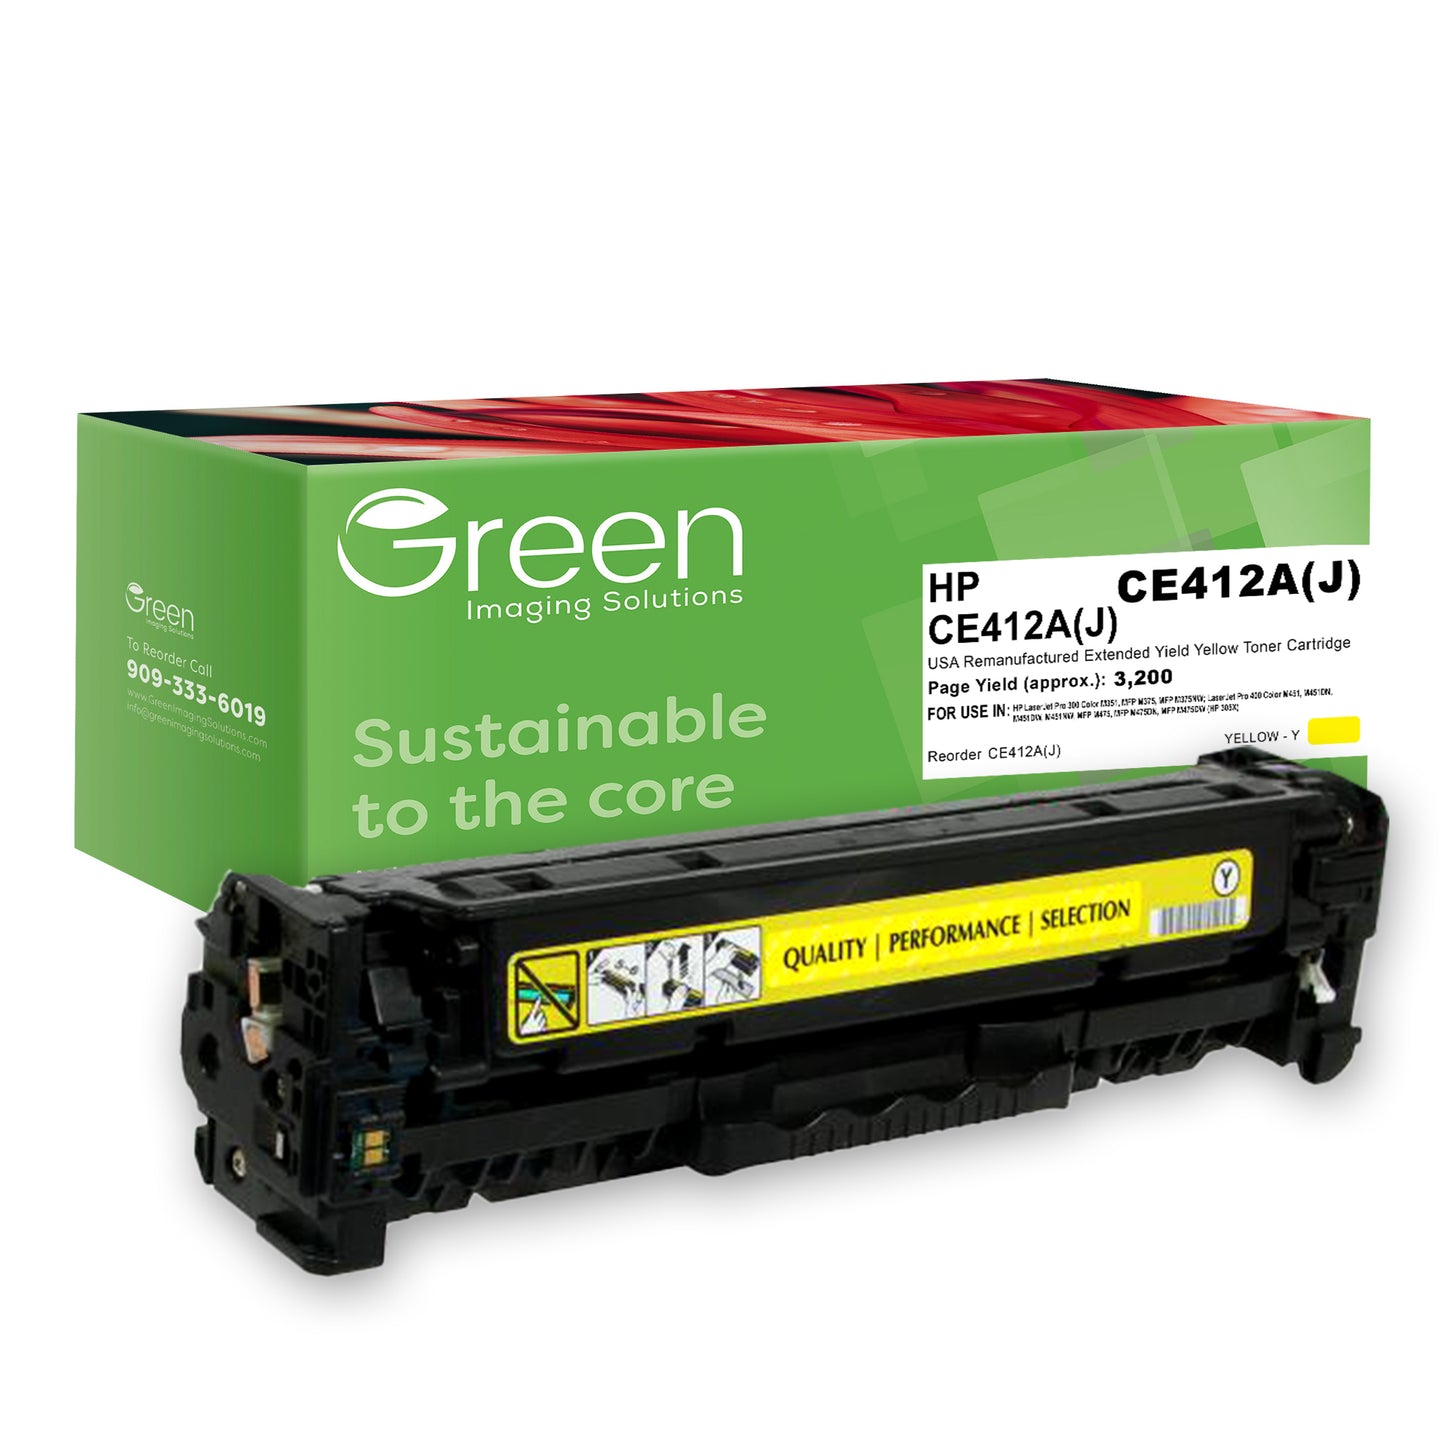 GIS USA Remanufactured Extended Yield Yellow Toner Cartridge for HP CE412A (HP 305A)